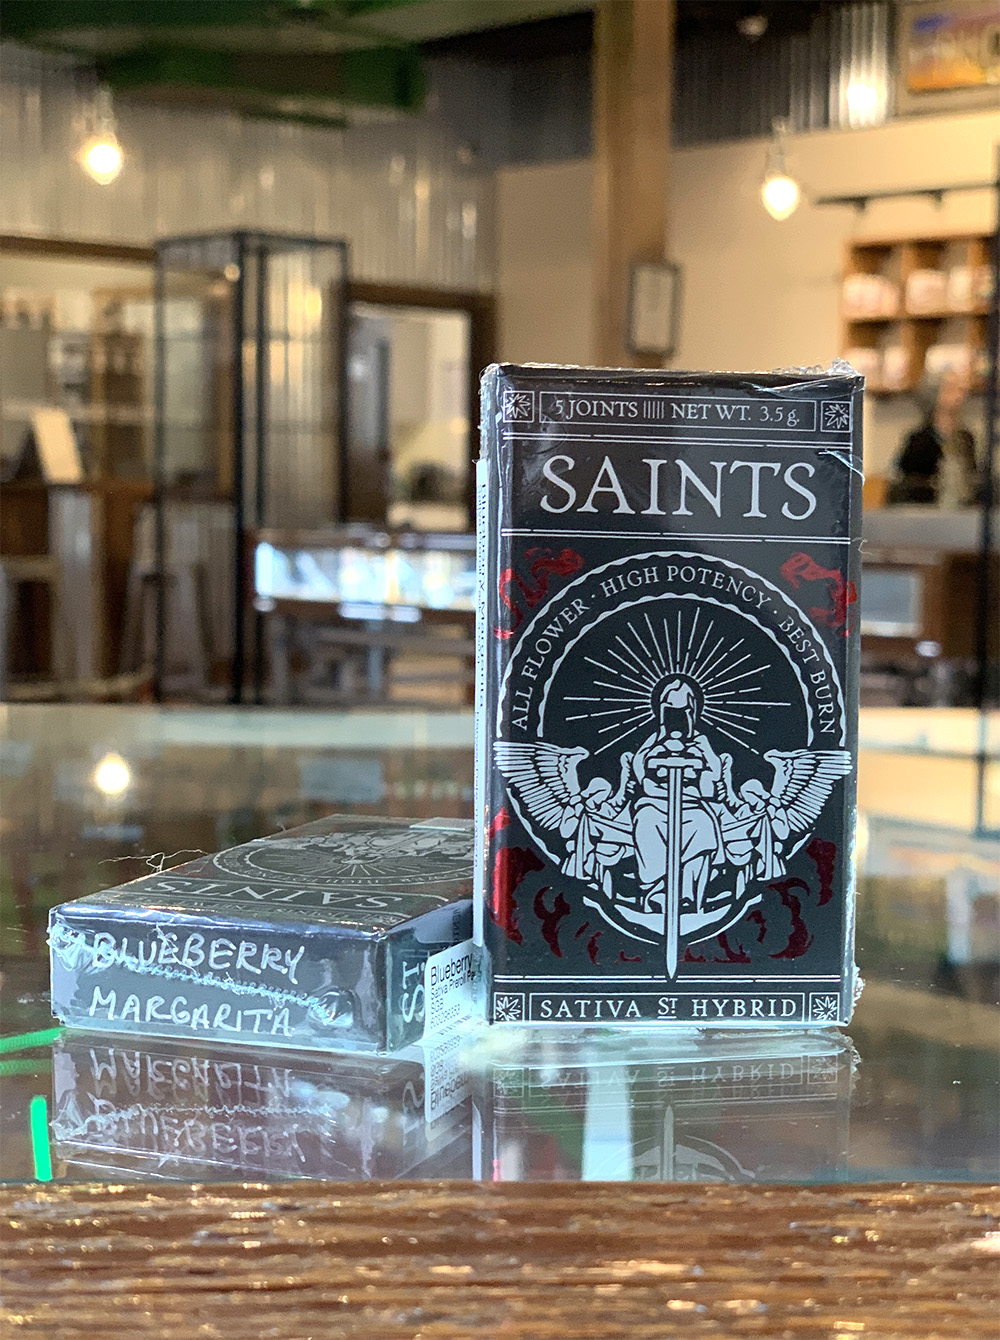 Saints joints packs are as beautiful outside as they are inside.